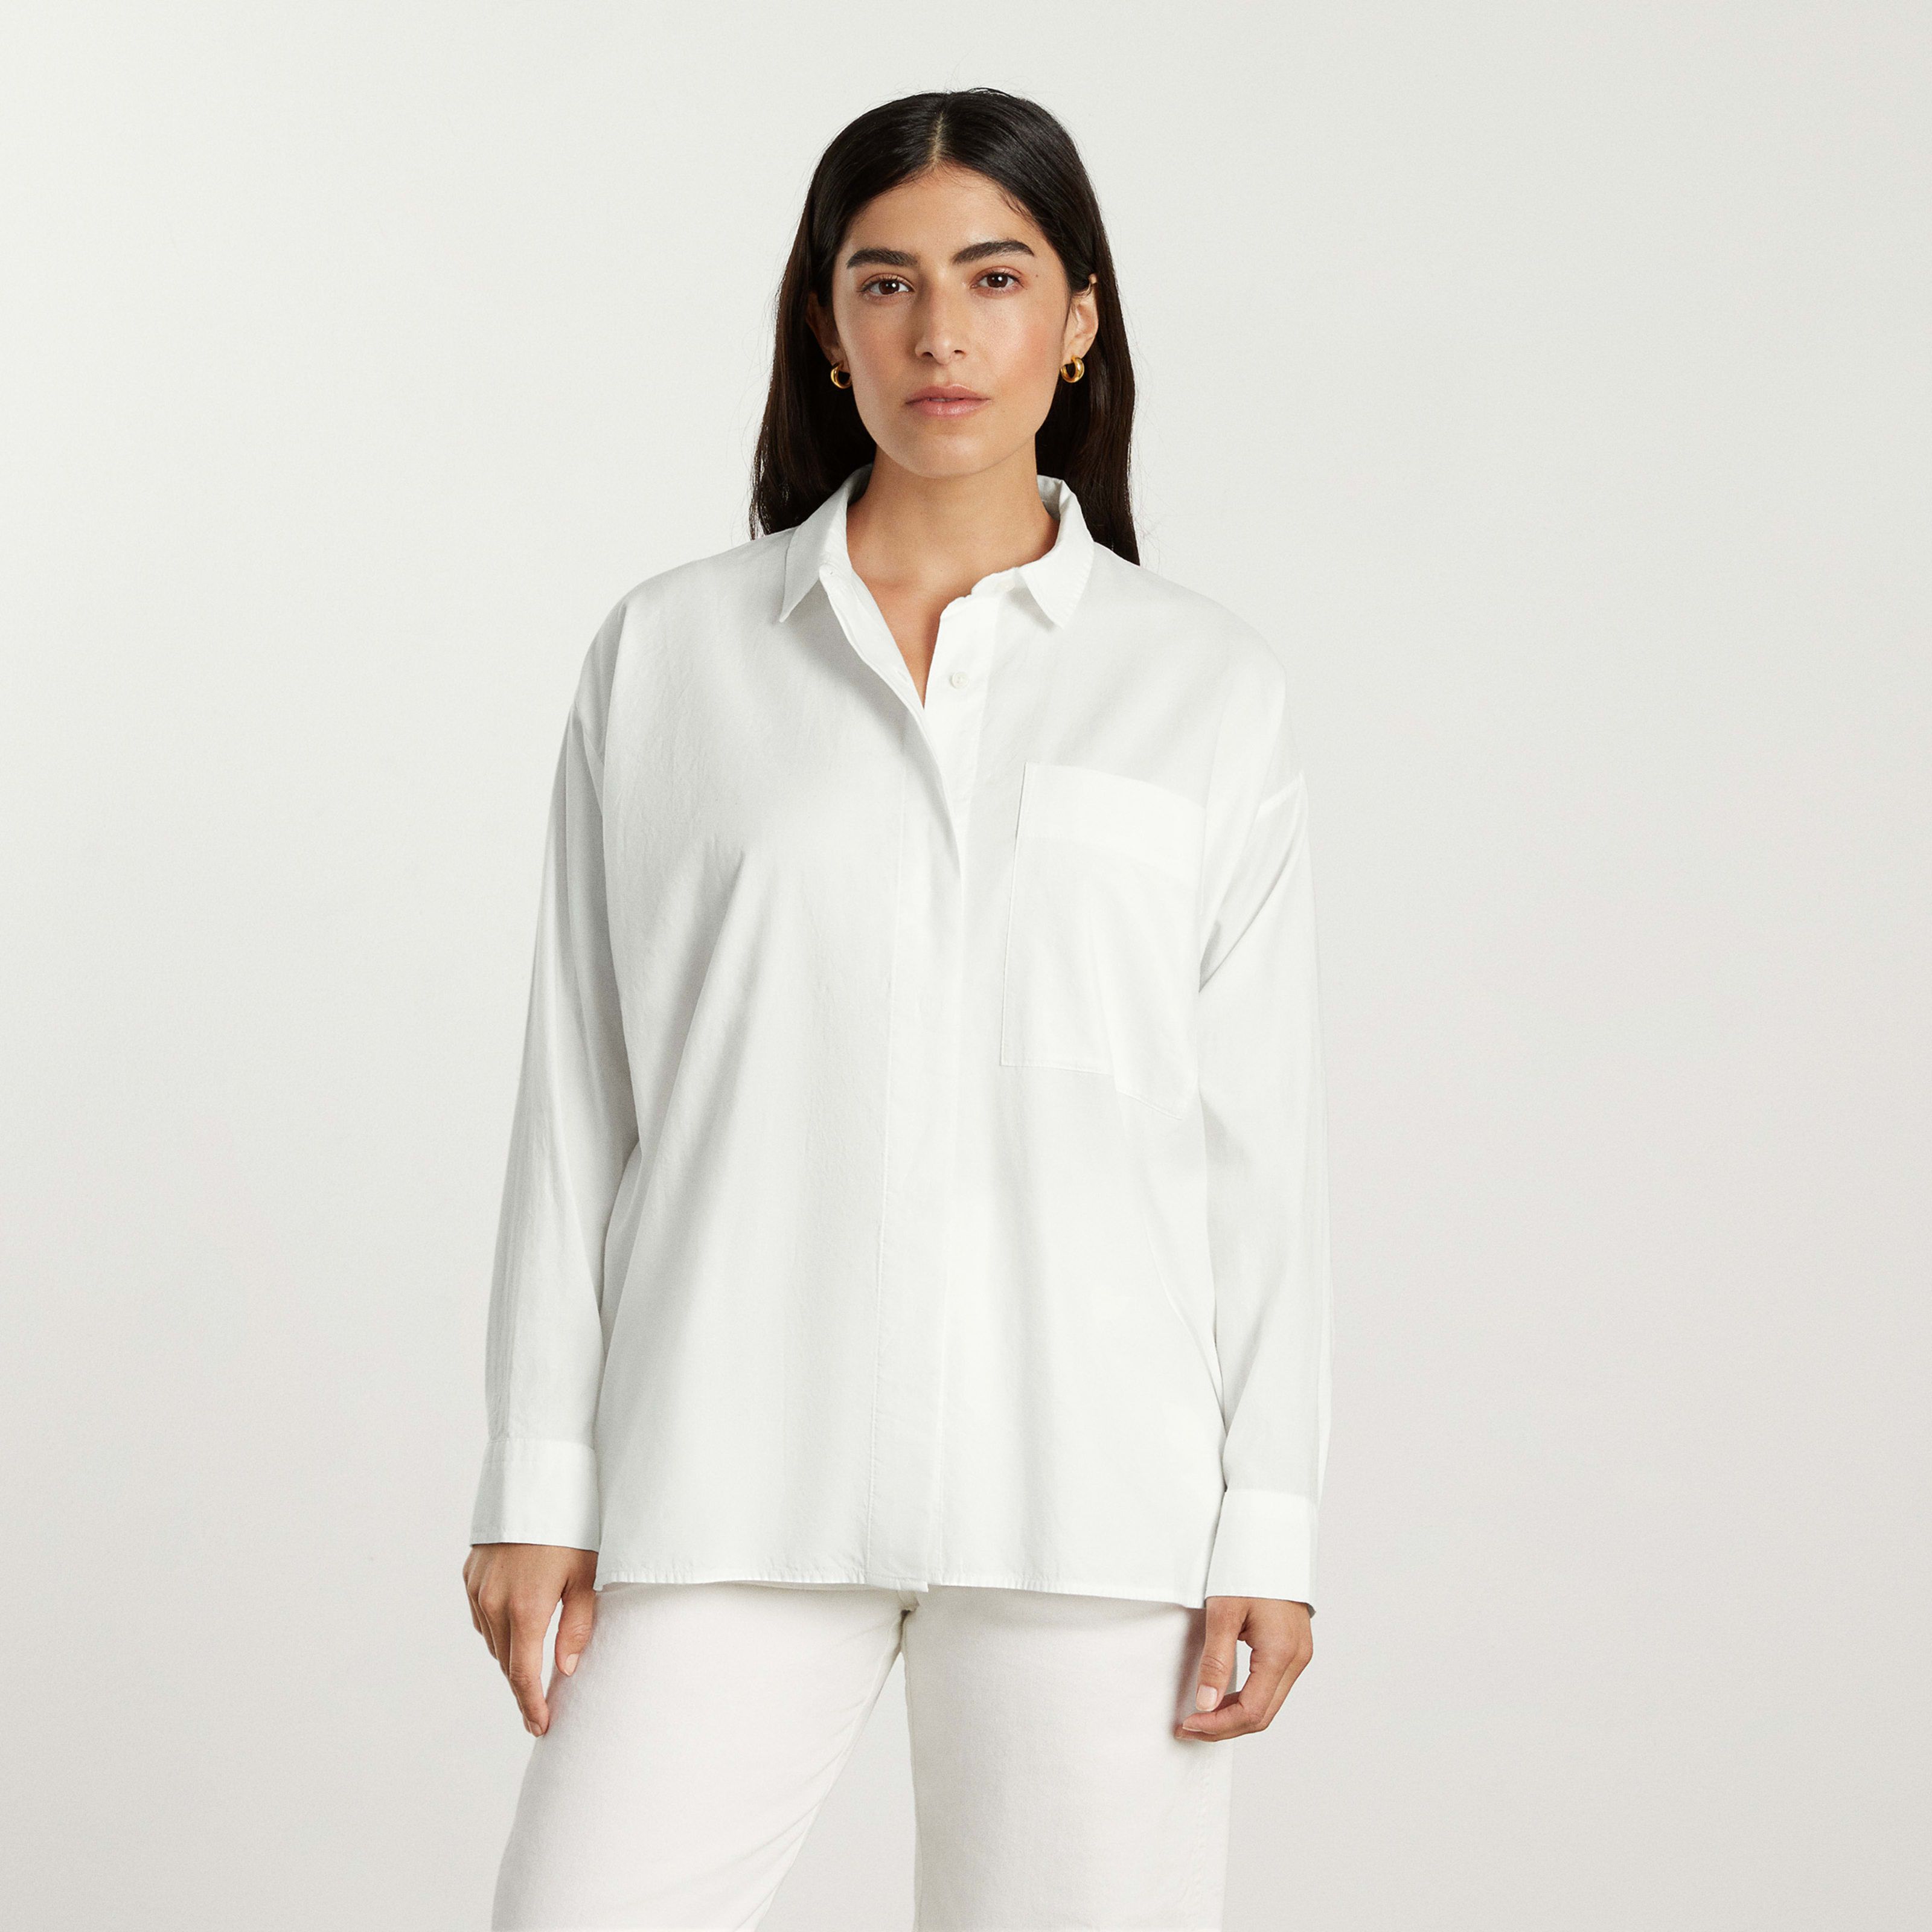 Women's Oversized Silky Cotton Shirt by Everlane in White, Size M | Everlane